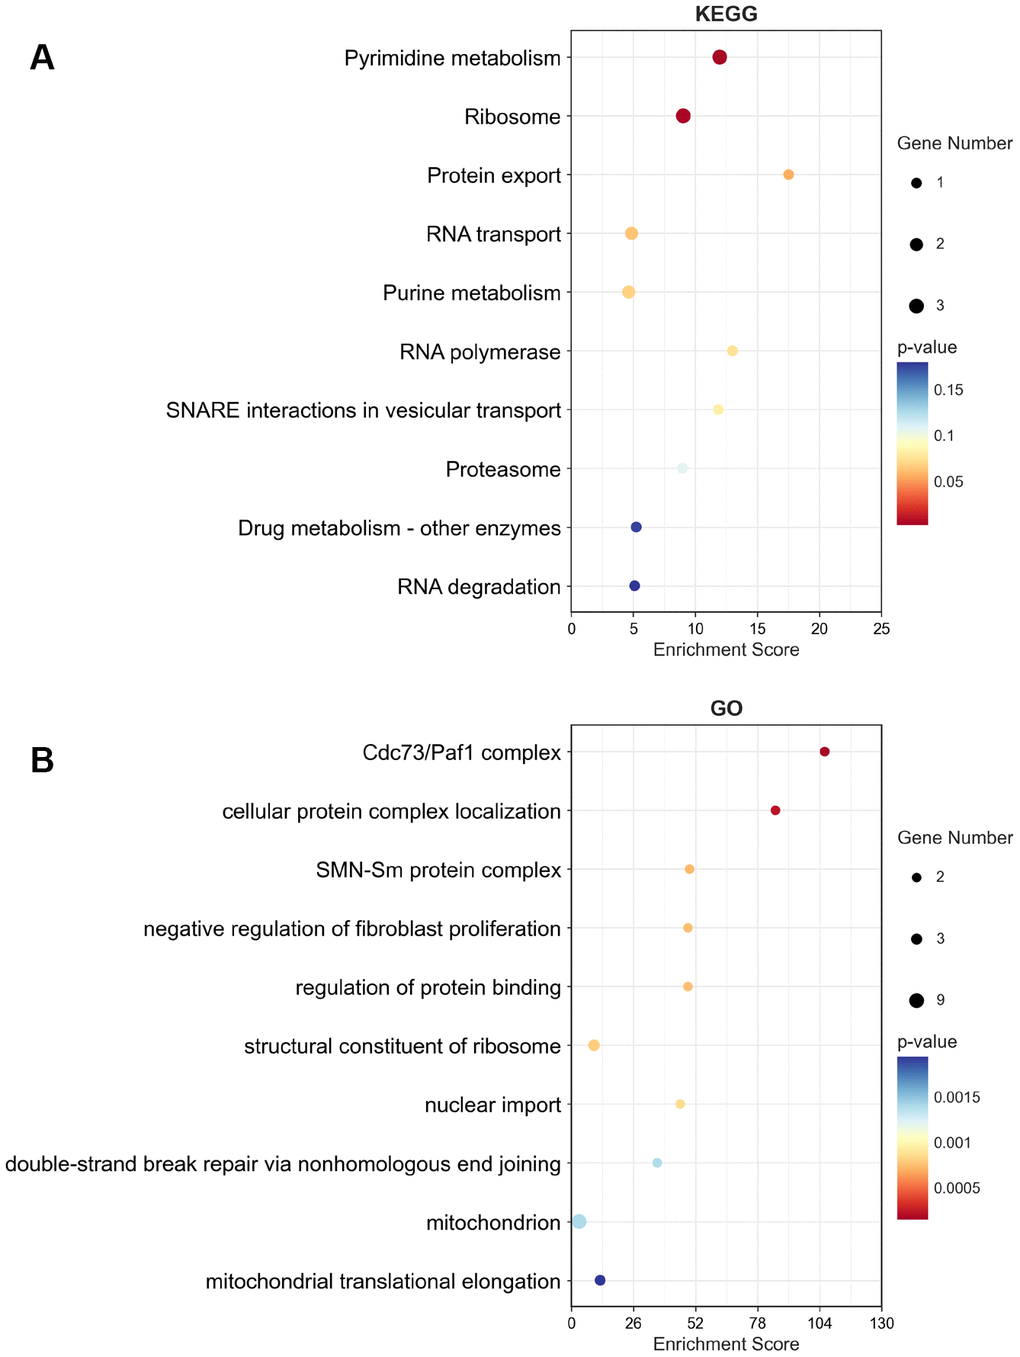 KEGG and GO enrichment of top 50 similar genes related to MRPS23 in glioma. The KEGG term (A) and GO term (B) of MRPS23 analysis by using top 50 similar genes related to it in glioma.